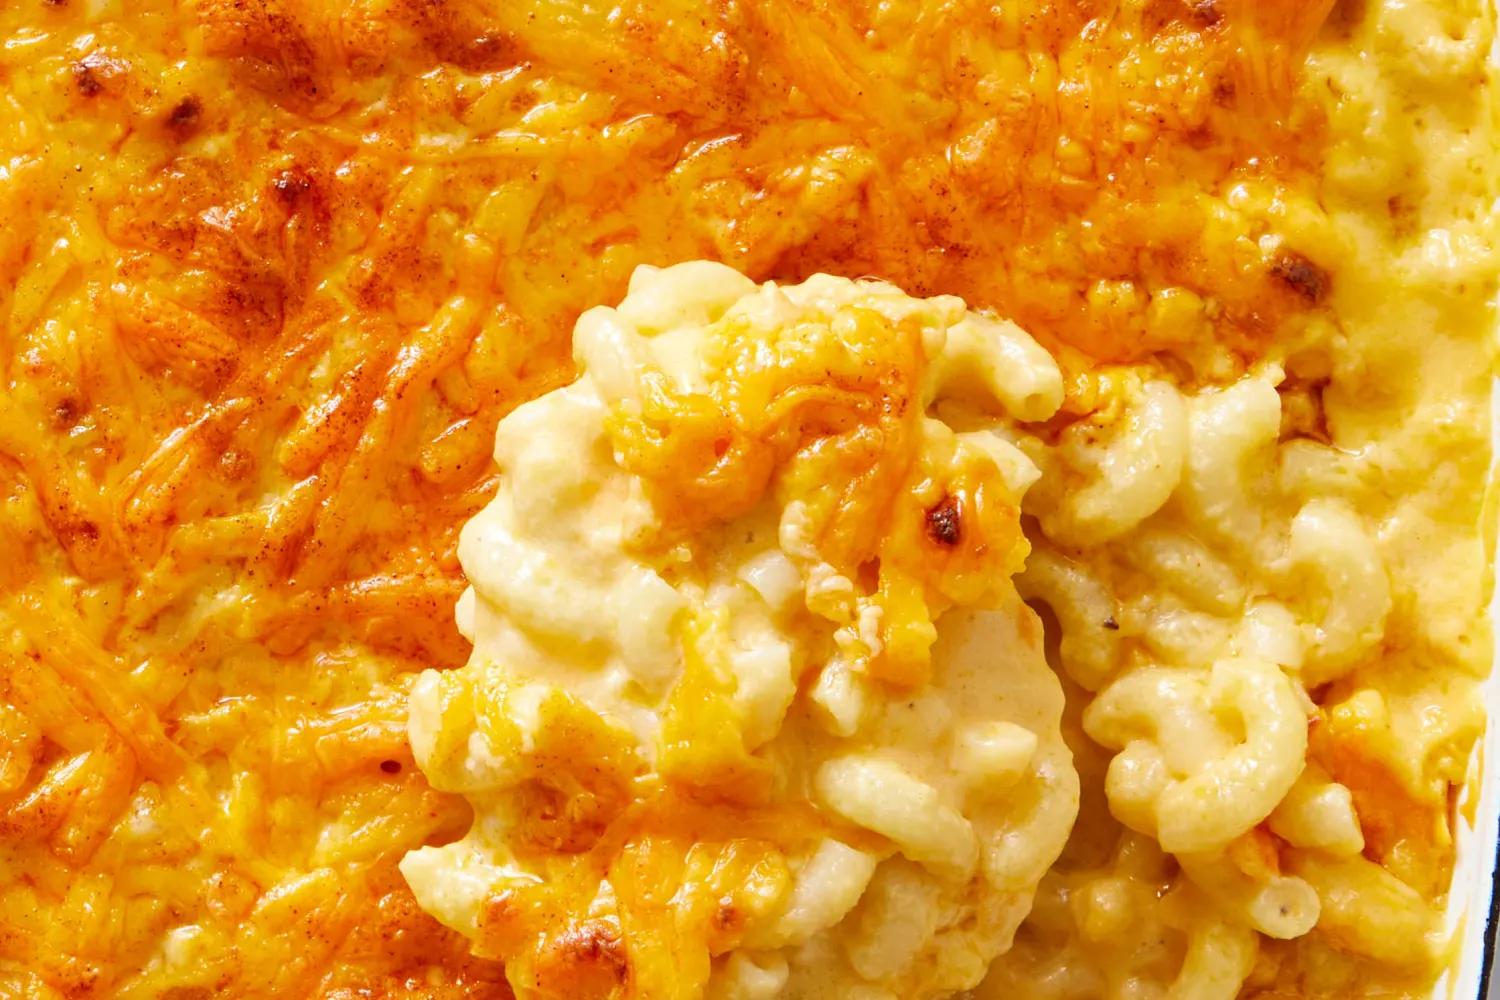 smoked cheddar mac and cheese - What kind of cheese is best for mac and cheese